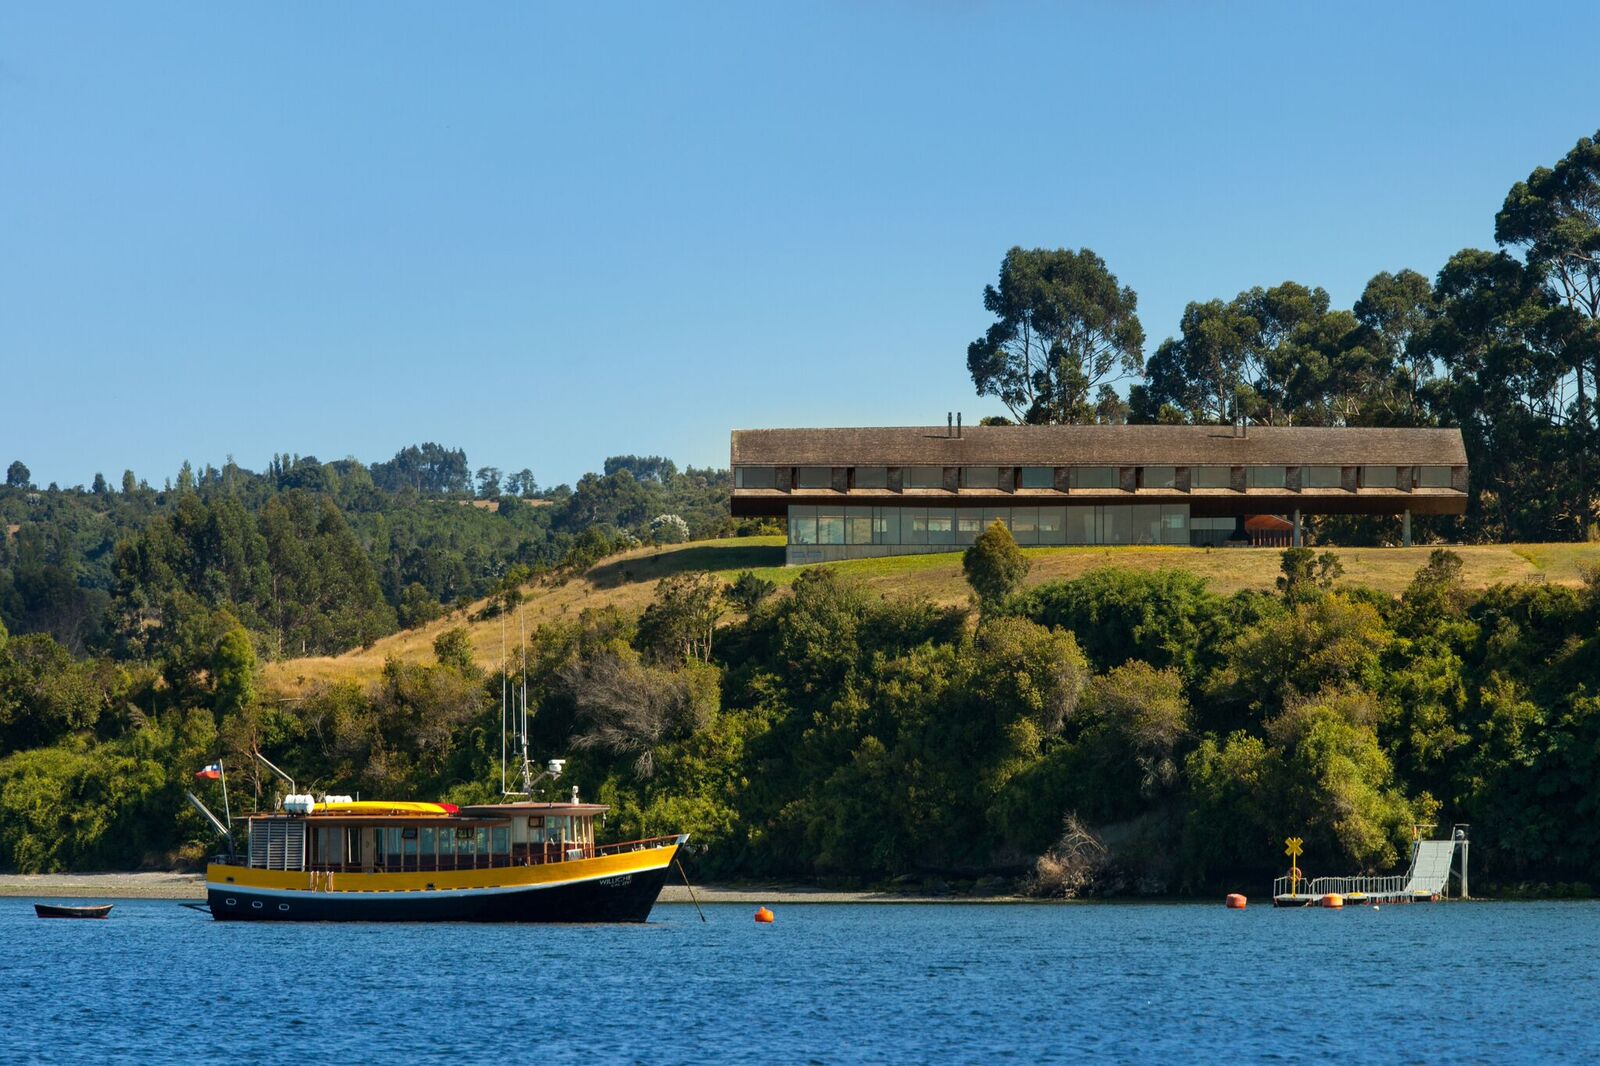 Exterior seen from the water of Hotel Tierra Chiloe, Chile